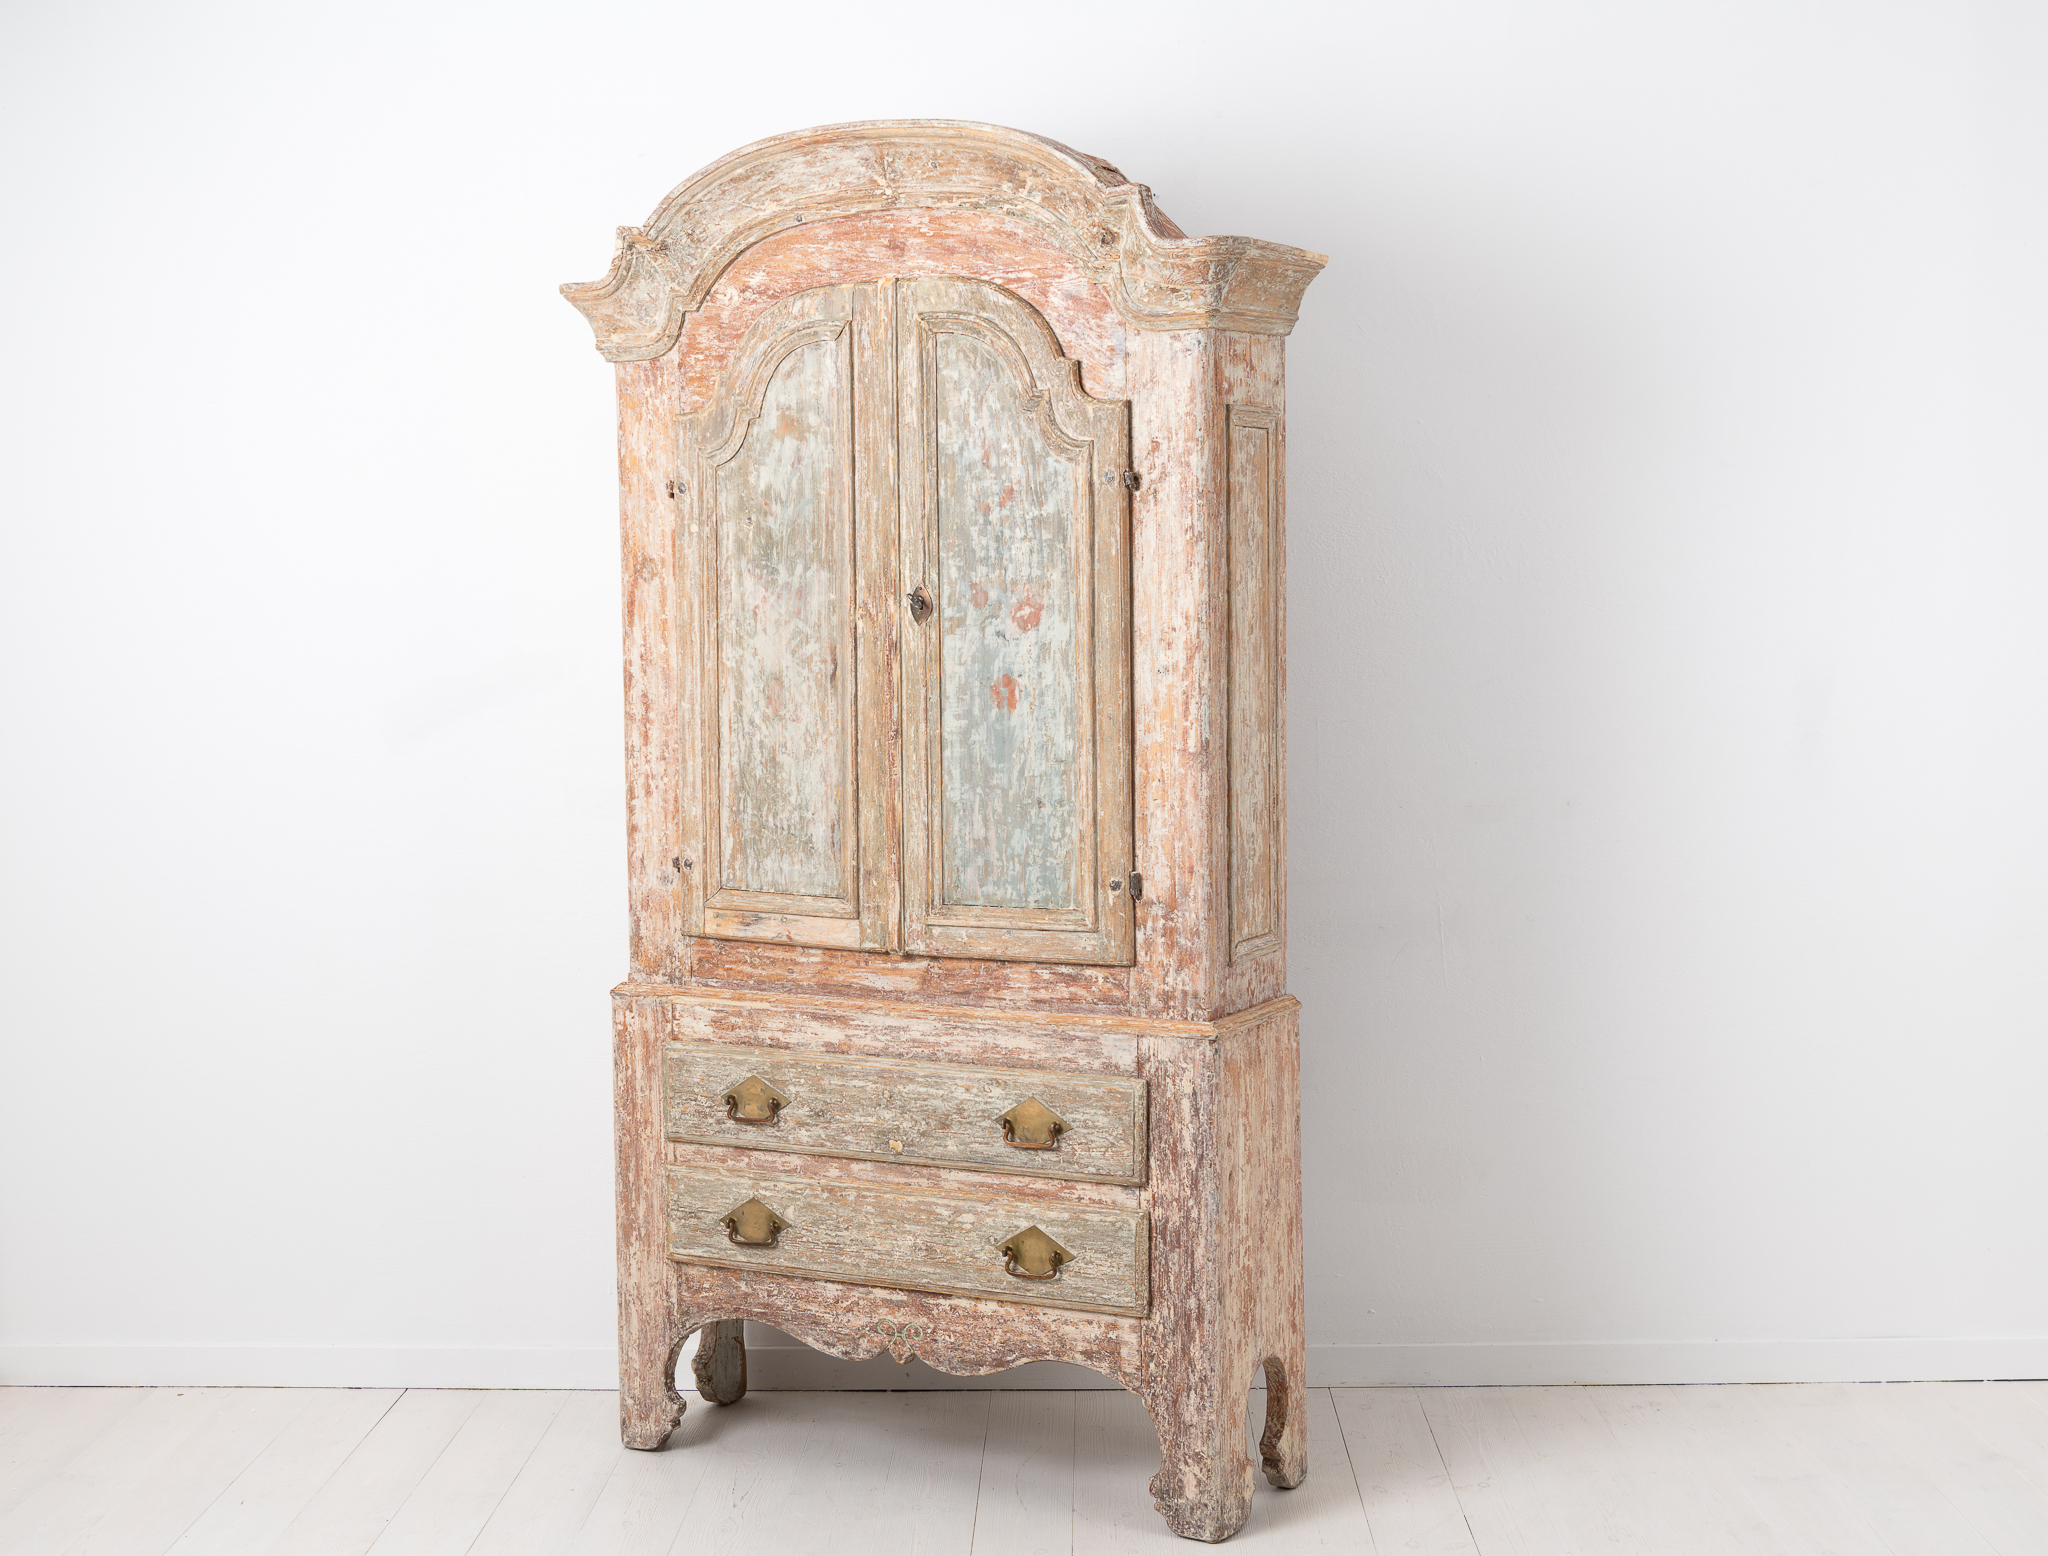 Late 1700s rococo cabinet from Jämtland in northern Sweden. The cabinet is a country furniture with traces of the original paint